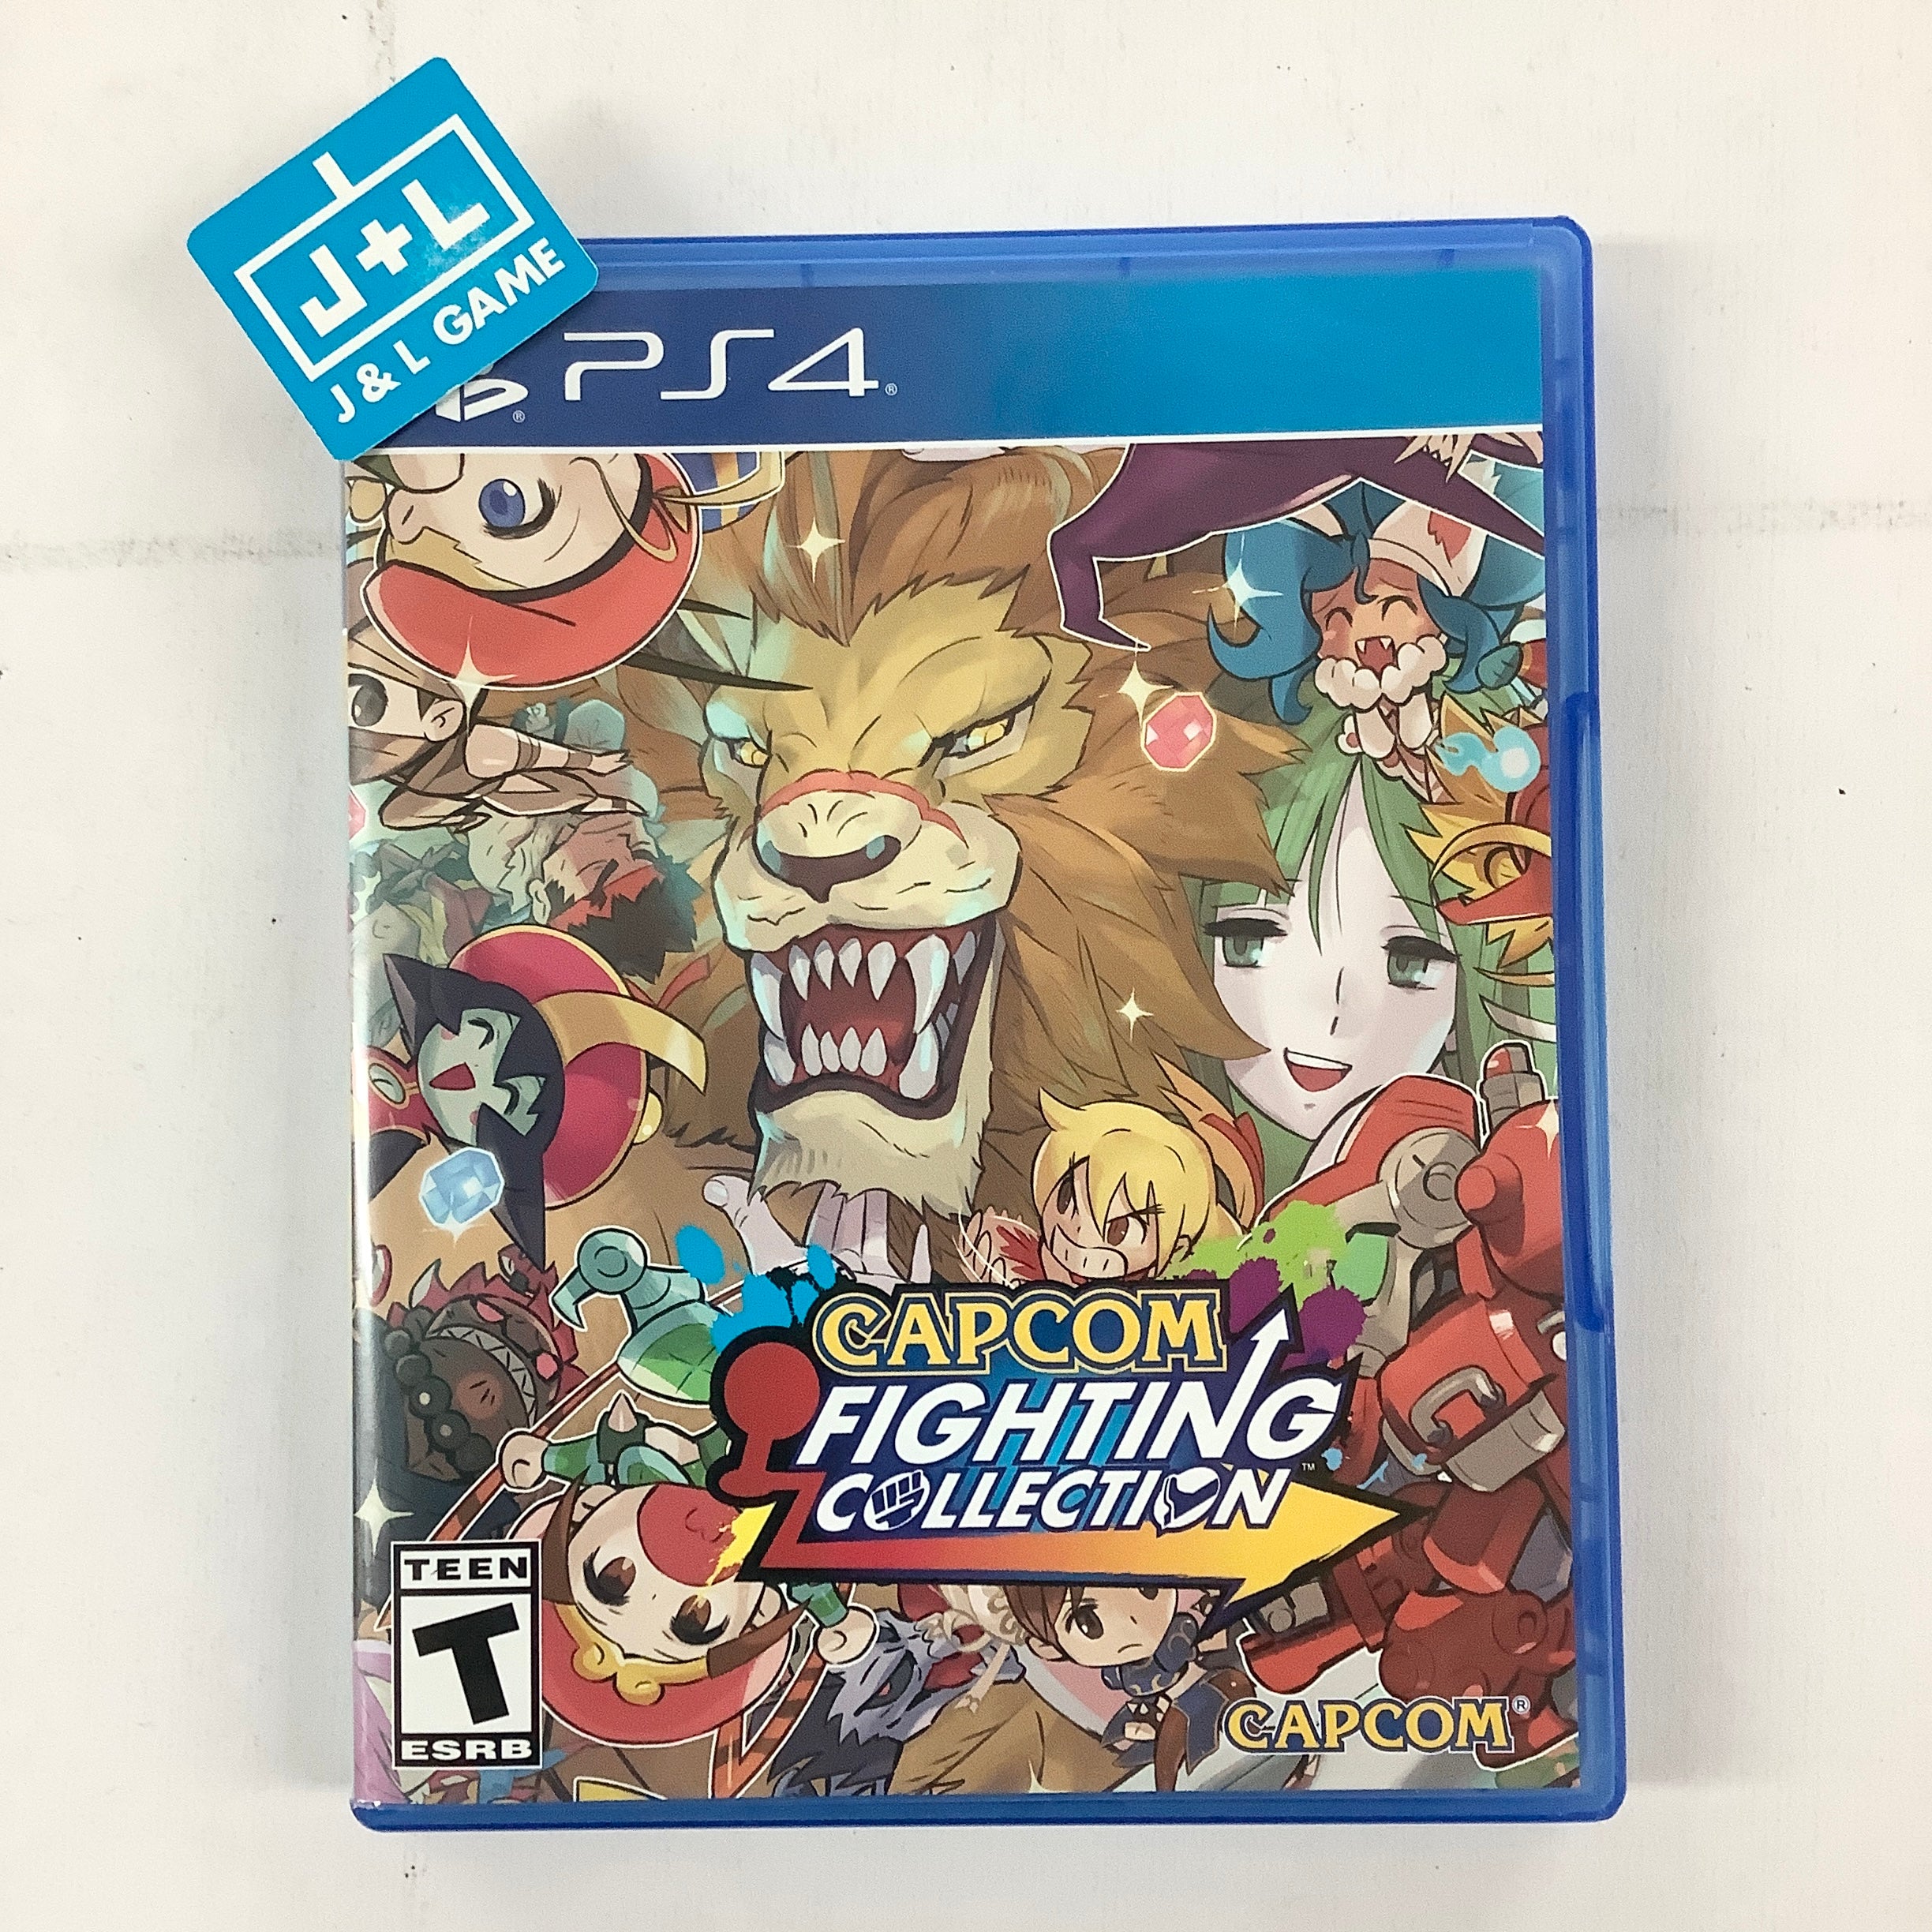 Capcom Fighting Collection - (PS4) PlayStation 4 [UNBOXING] Video Games Capcom   